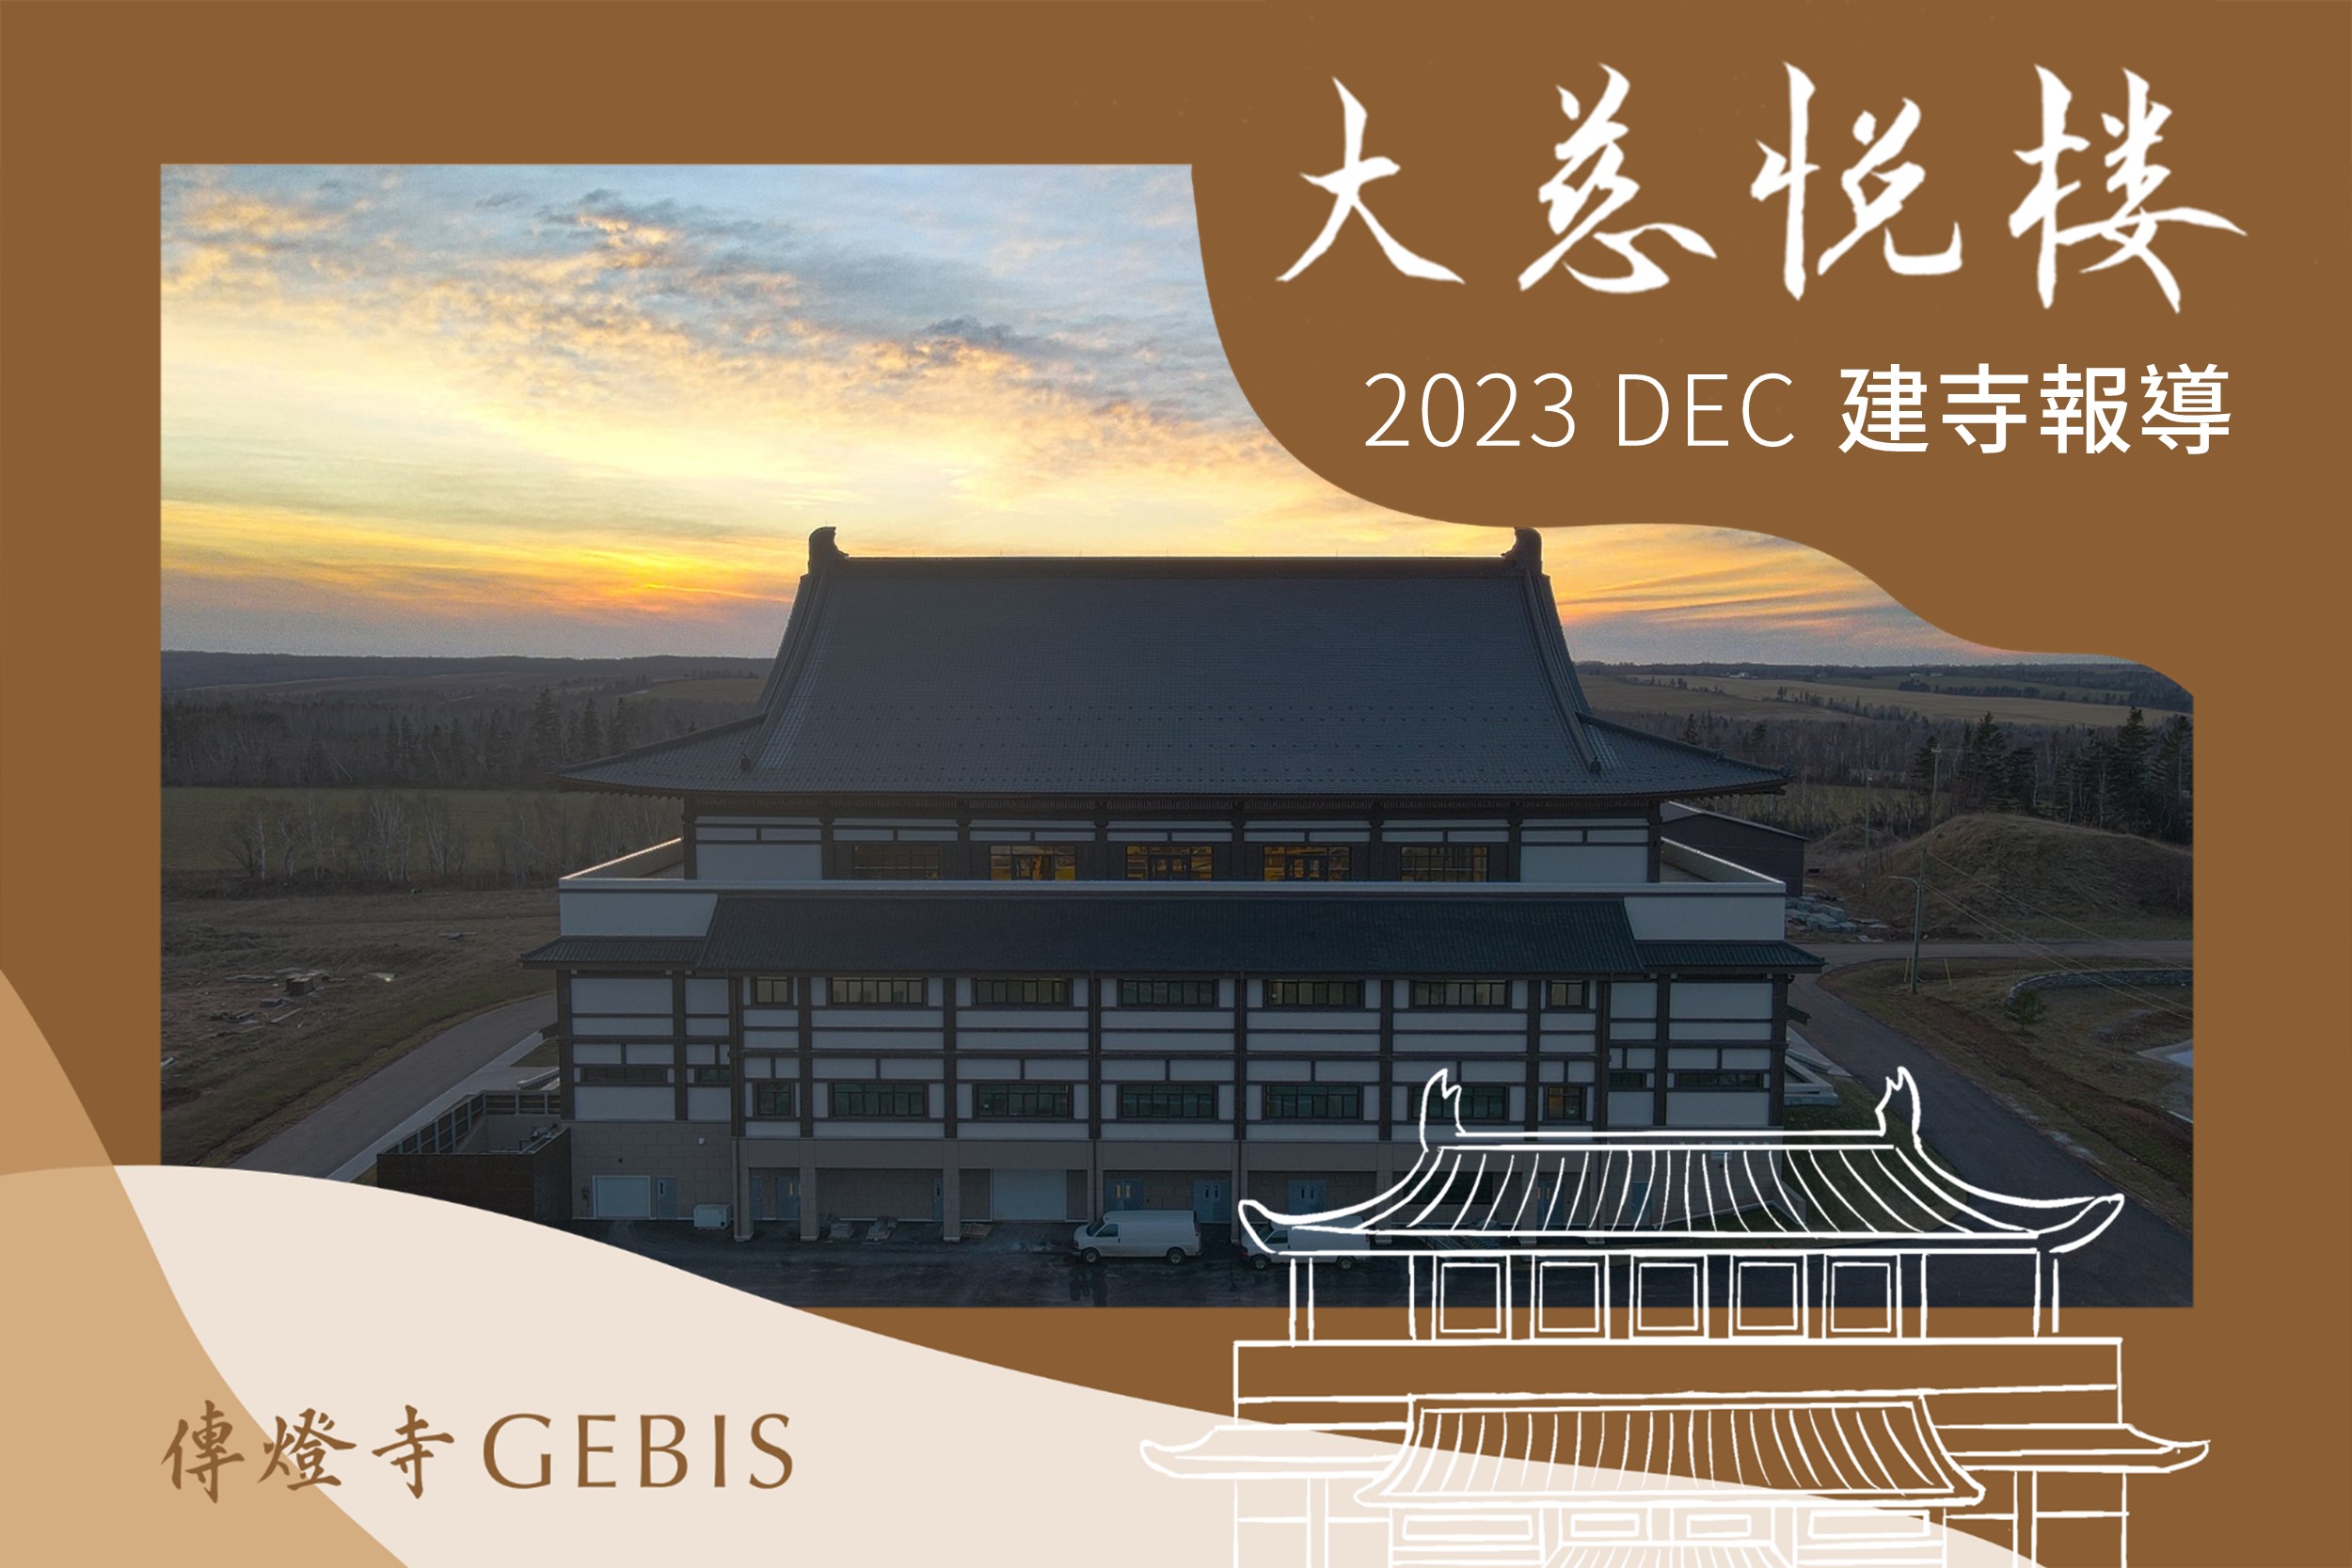 You are currently viewing 傳燈寺大慈悅樓：2023年12月建寺報導